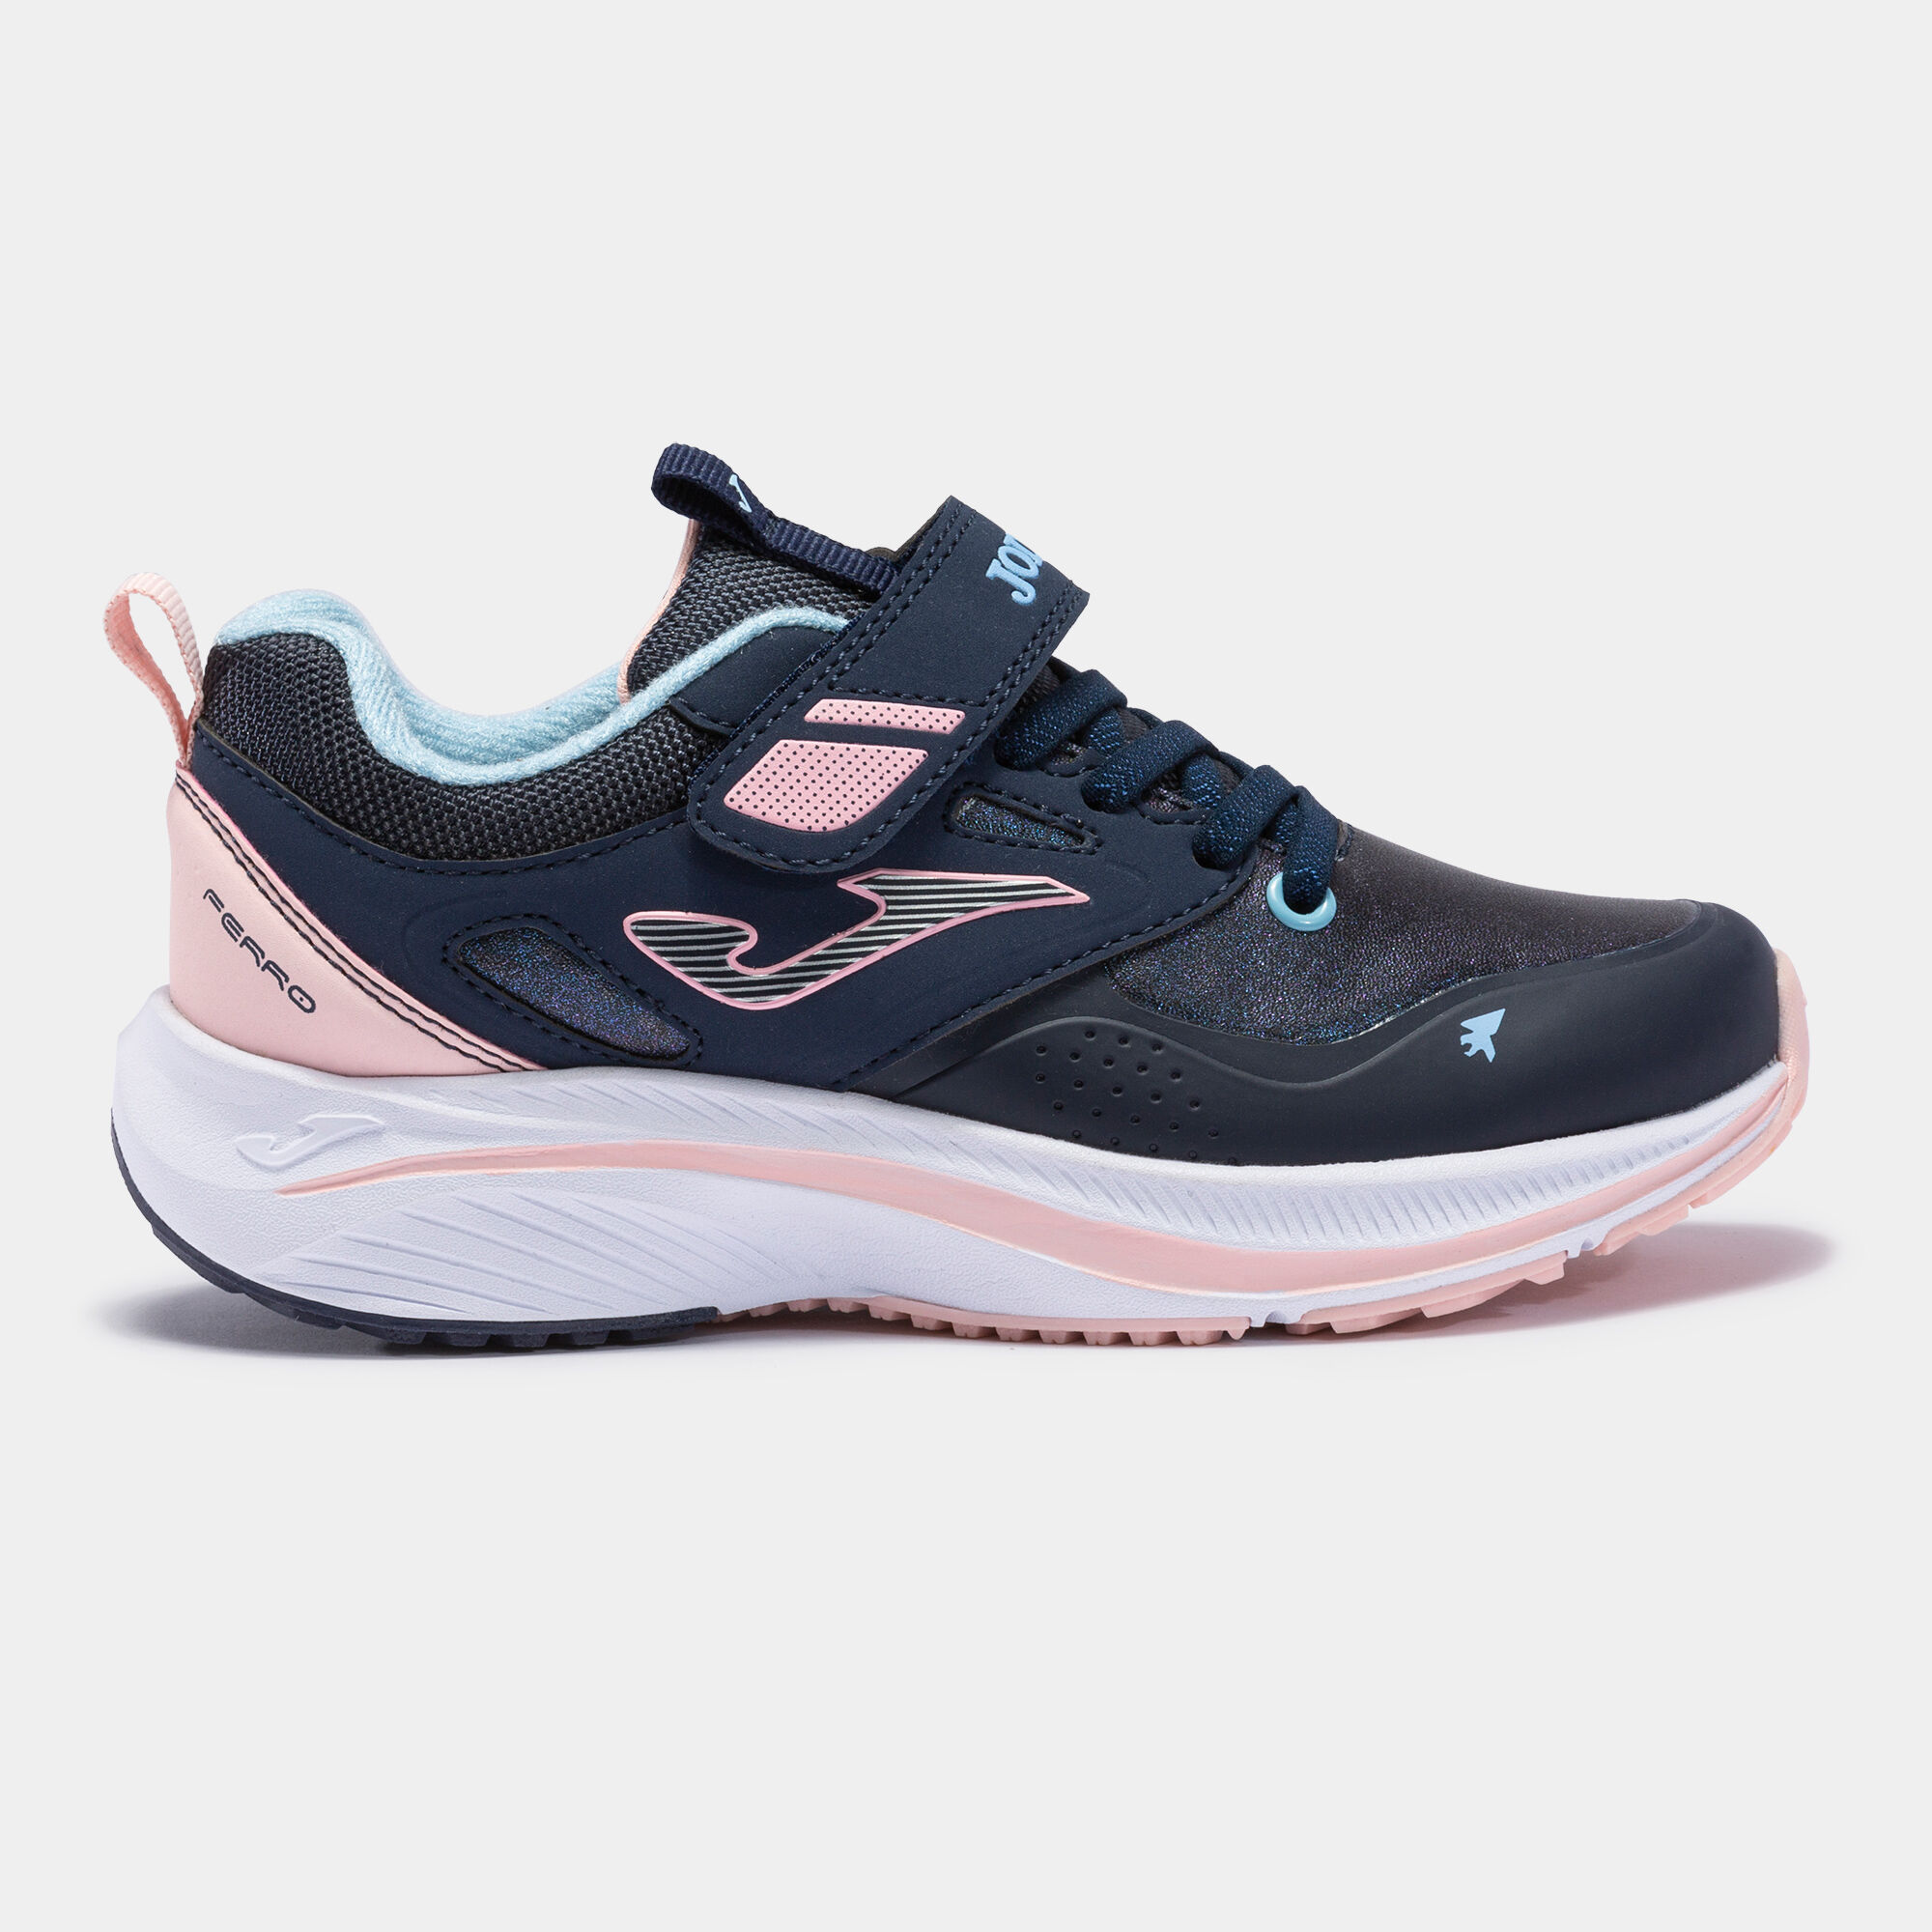 CASUAL SHOES FERRO 22 JUNIOR NAVY BLUE PINK